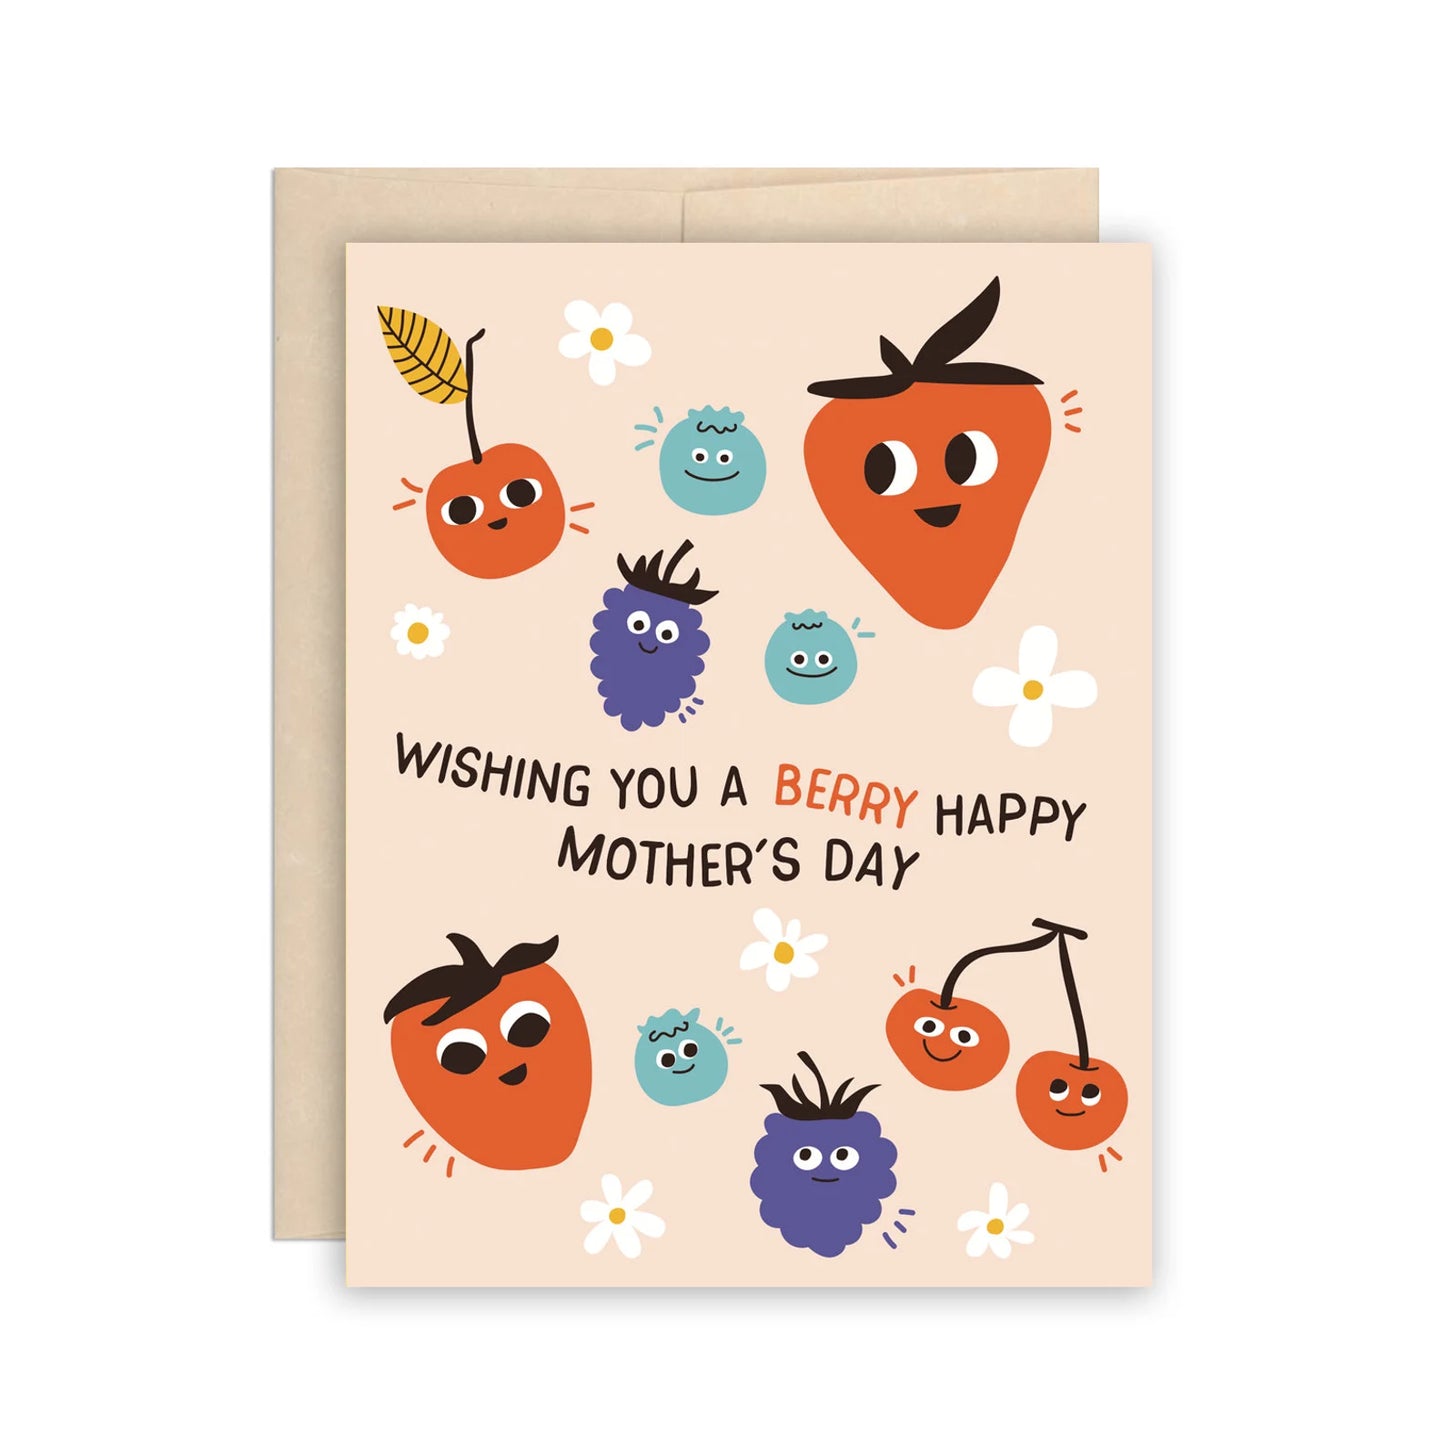 The Beautiful Project - Berry Happy Mother’s Day